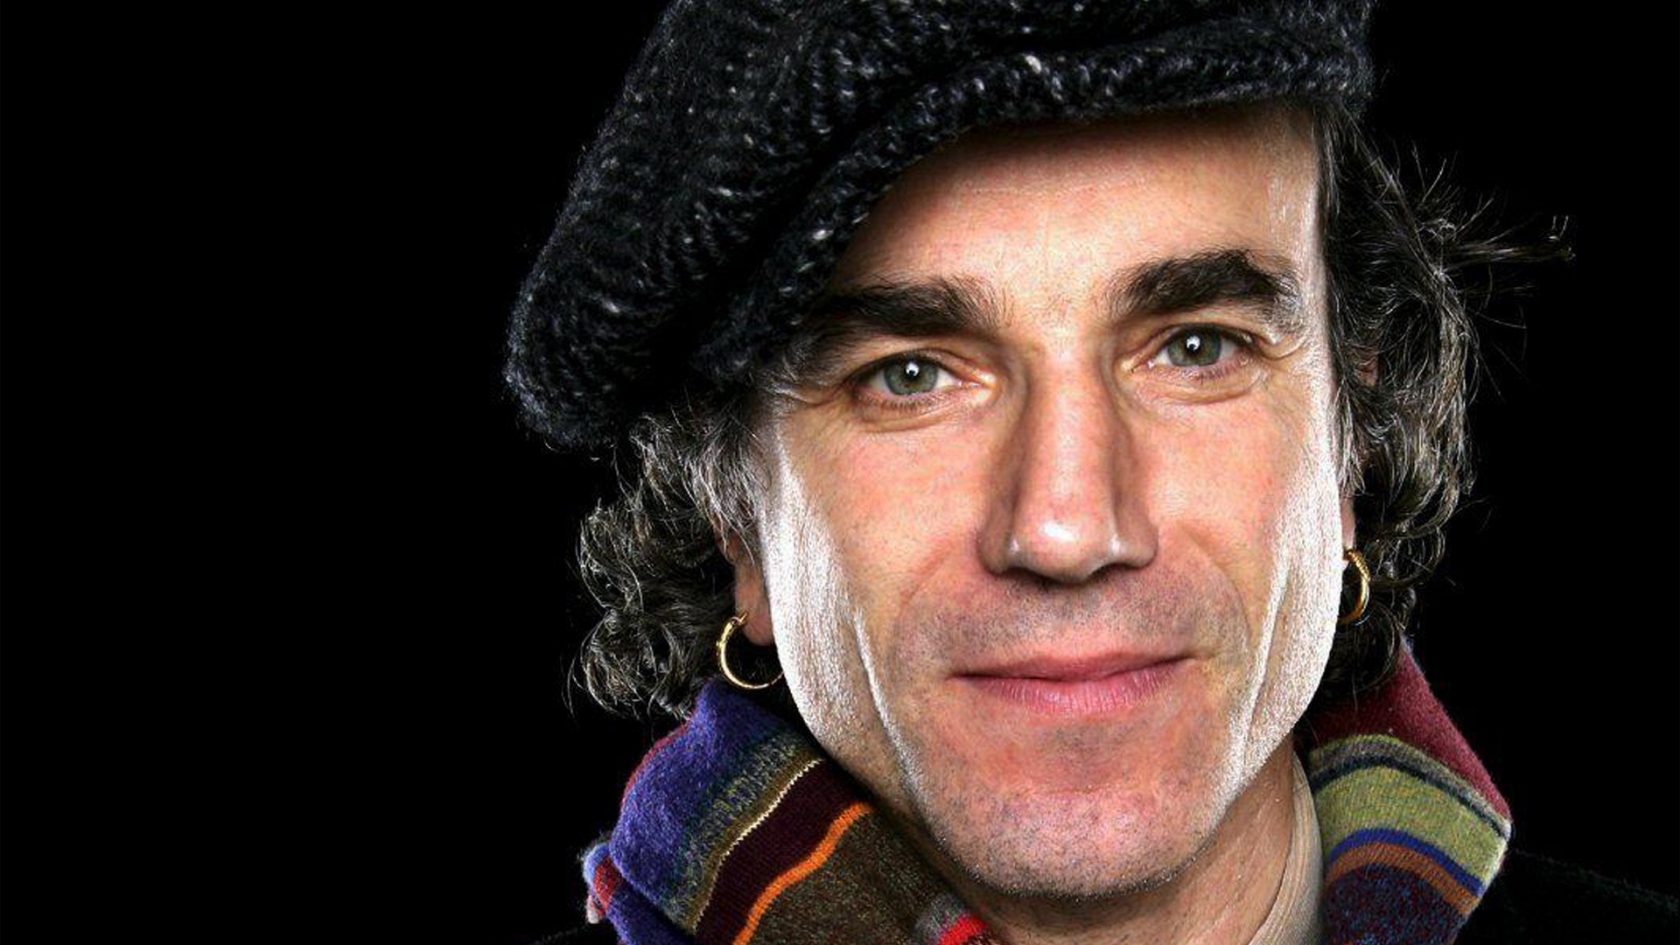 Daniel Day-Lewis for 1680 x 945 HDTV resolution